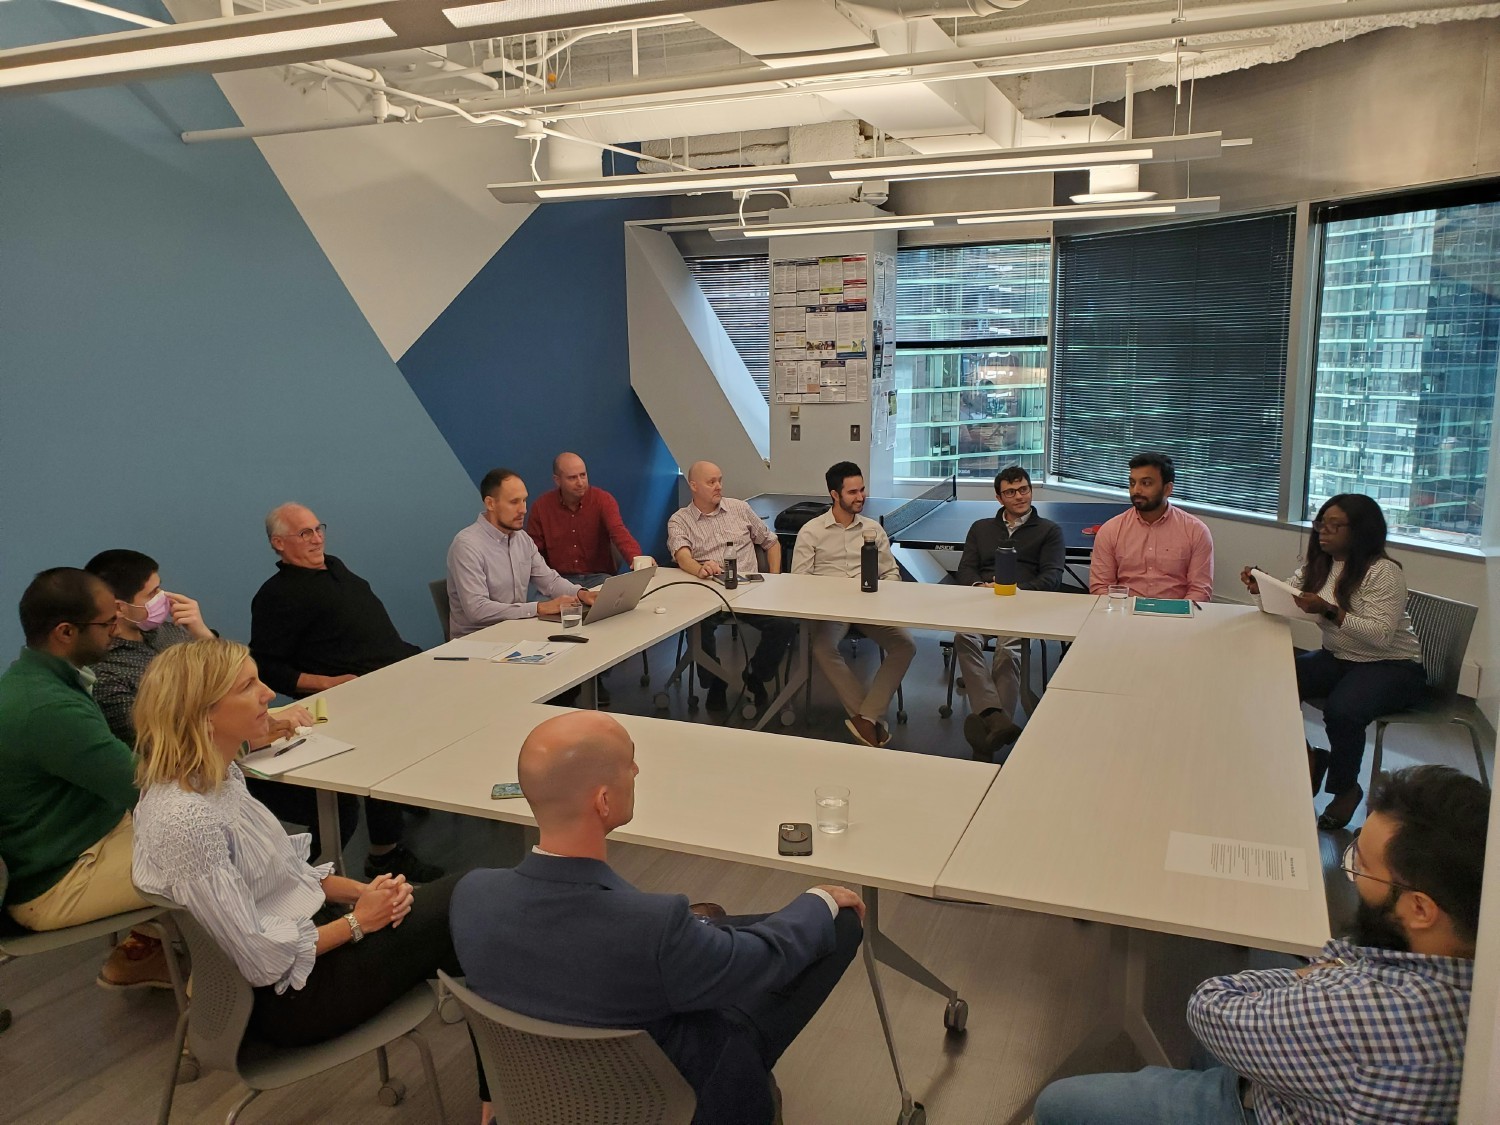 PMA's Chicago office meets with leaders for a company culture discussion.